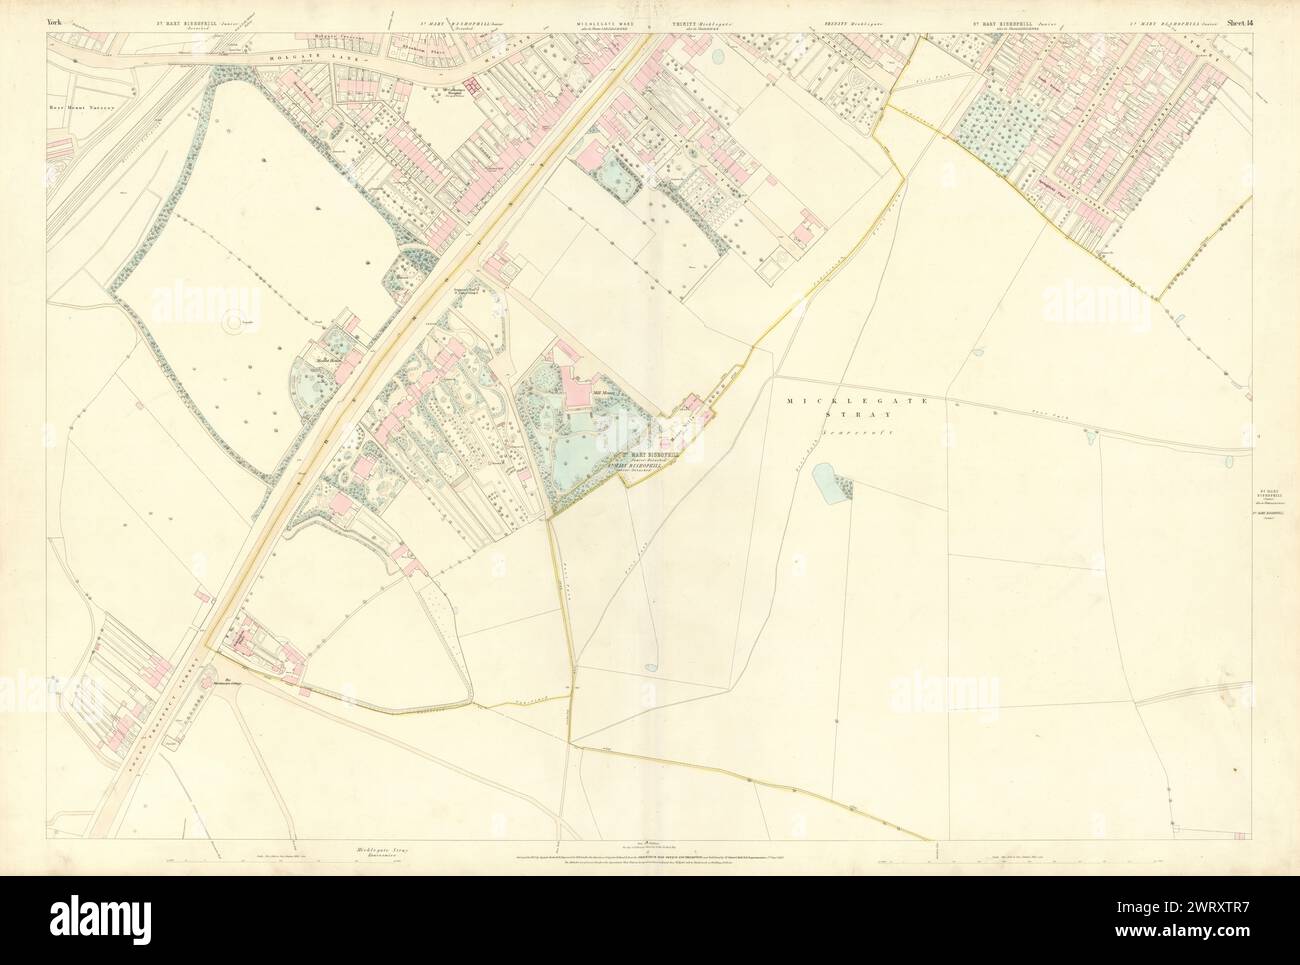 City of York #14 Mount Scarcroft Dringhouses Tadcaster Rd Knavesmire OS 1852 map Stock Photo